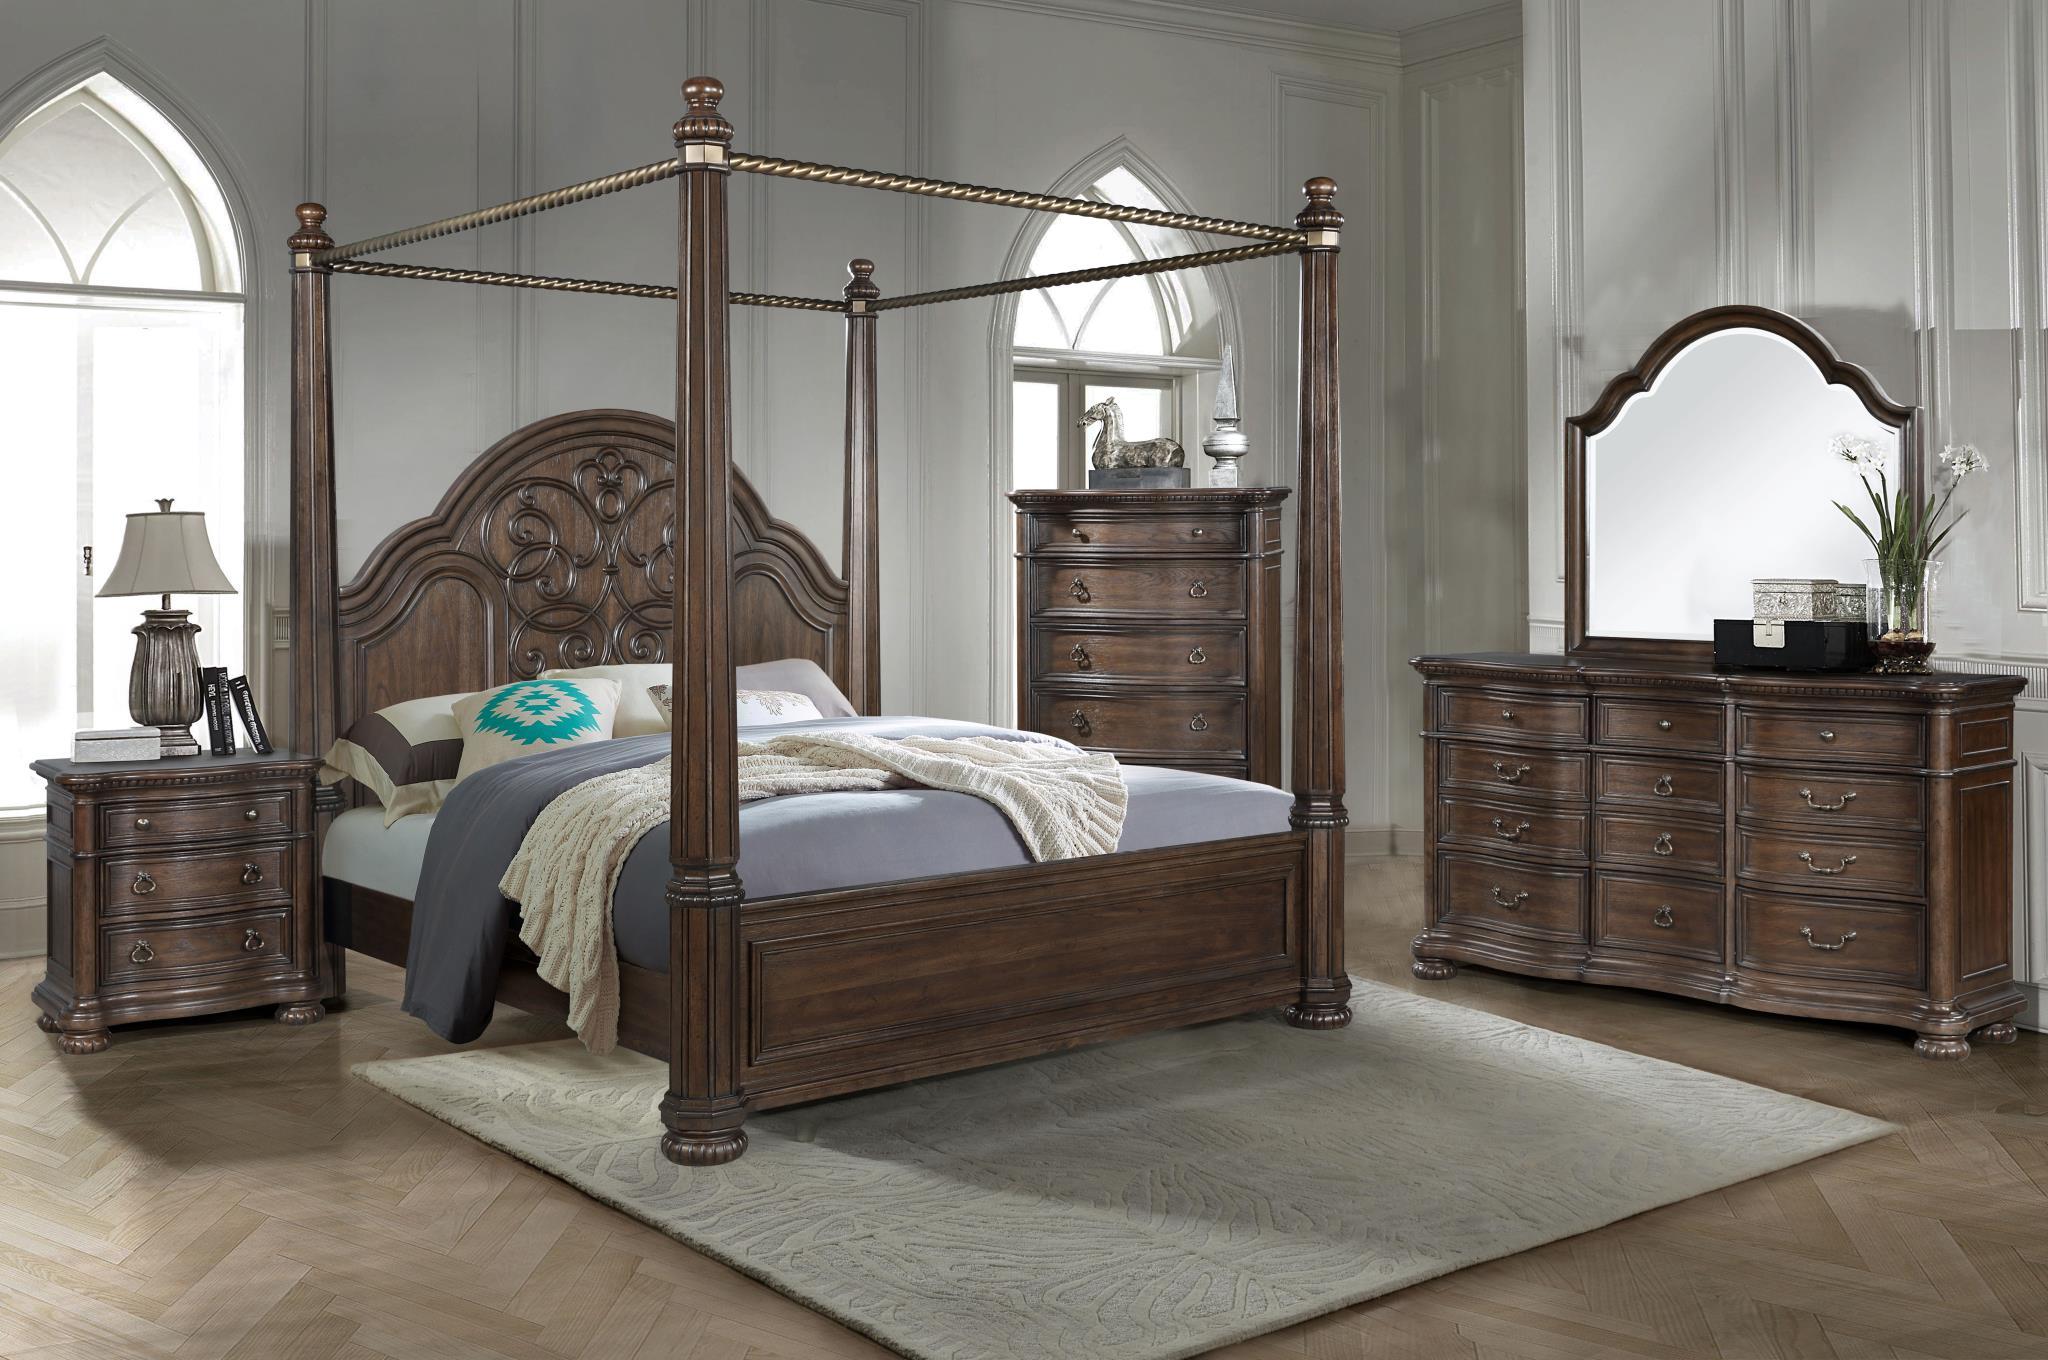 Contemporary, Traditional Canopy Bed TUSCANY 321-108 321-108 in Brown 